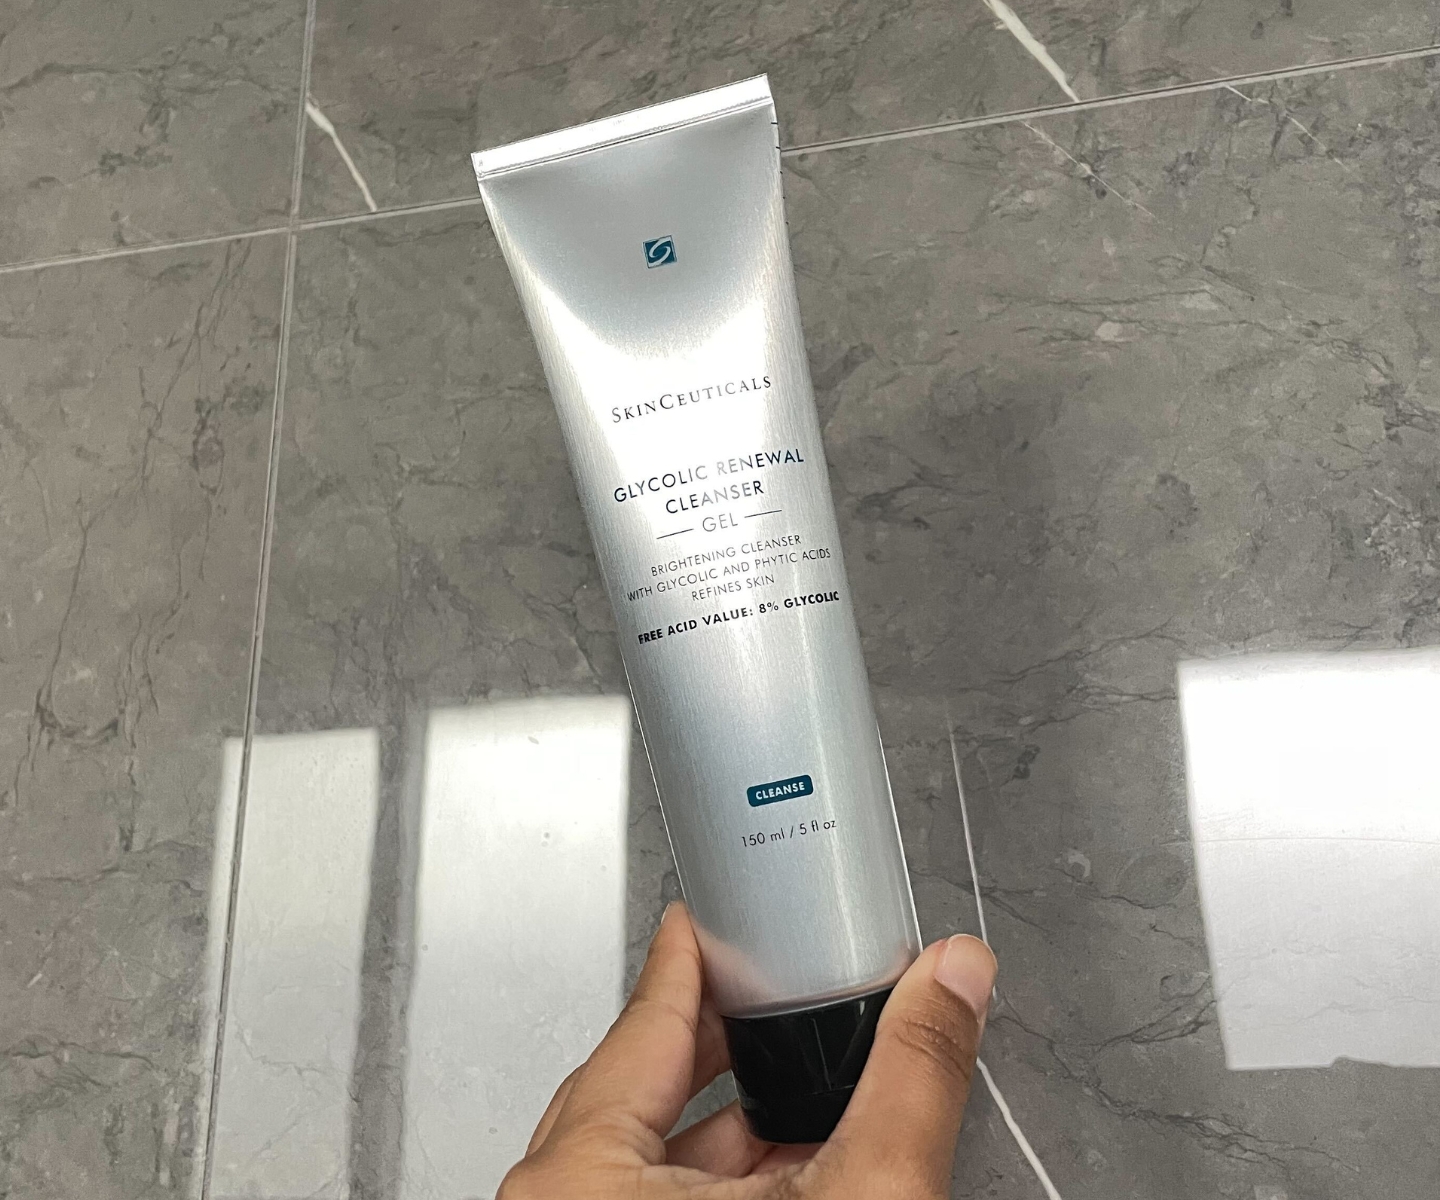 SkinCeuticals glycolic renewal cleanser